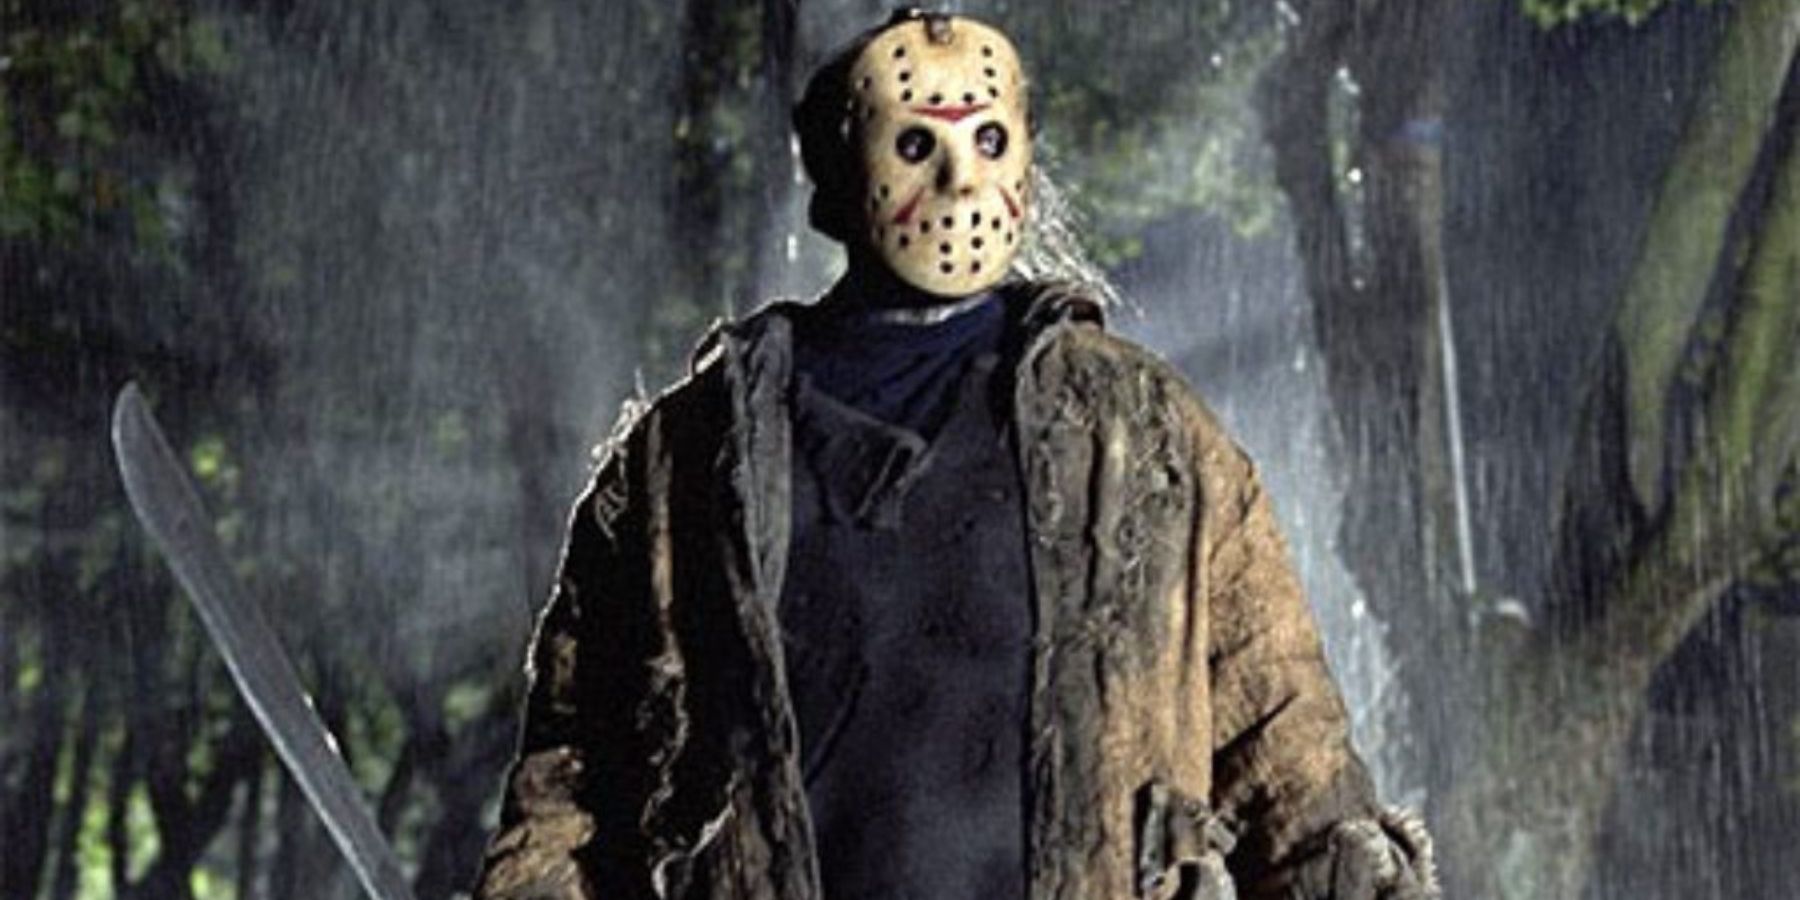 Jason Voorhees in his mask in Friday The 13th